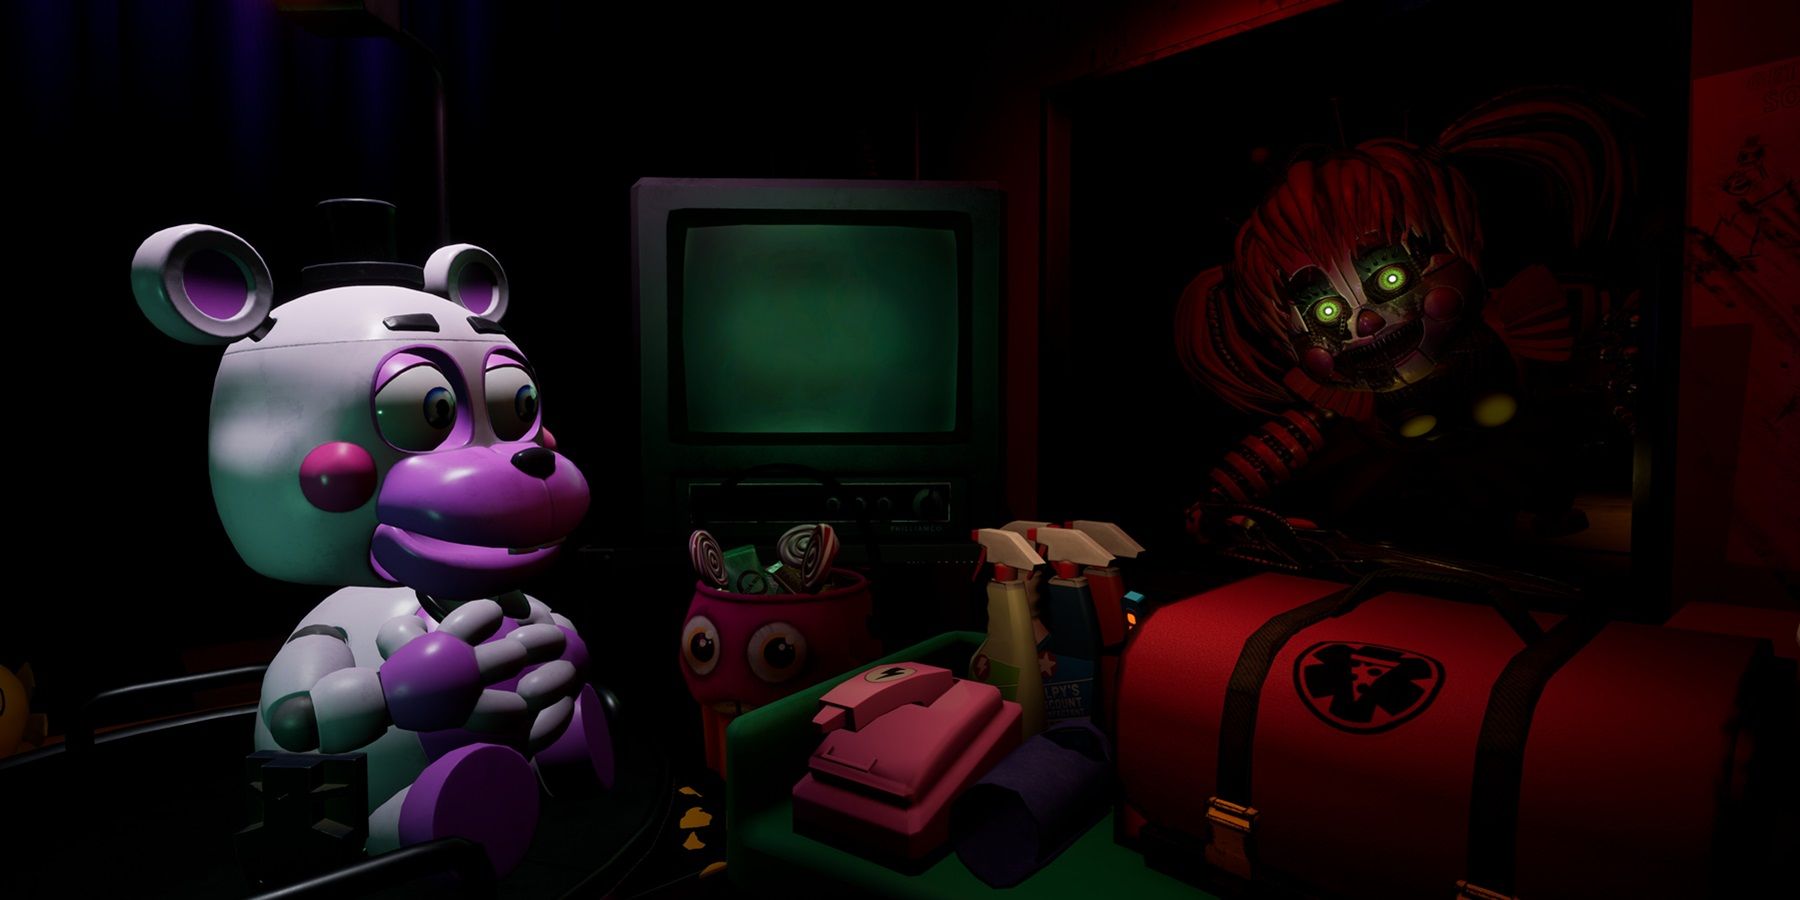 How Five Nights at Freddy's: Security Breach is Full of Irony After the RUIN  DLC